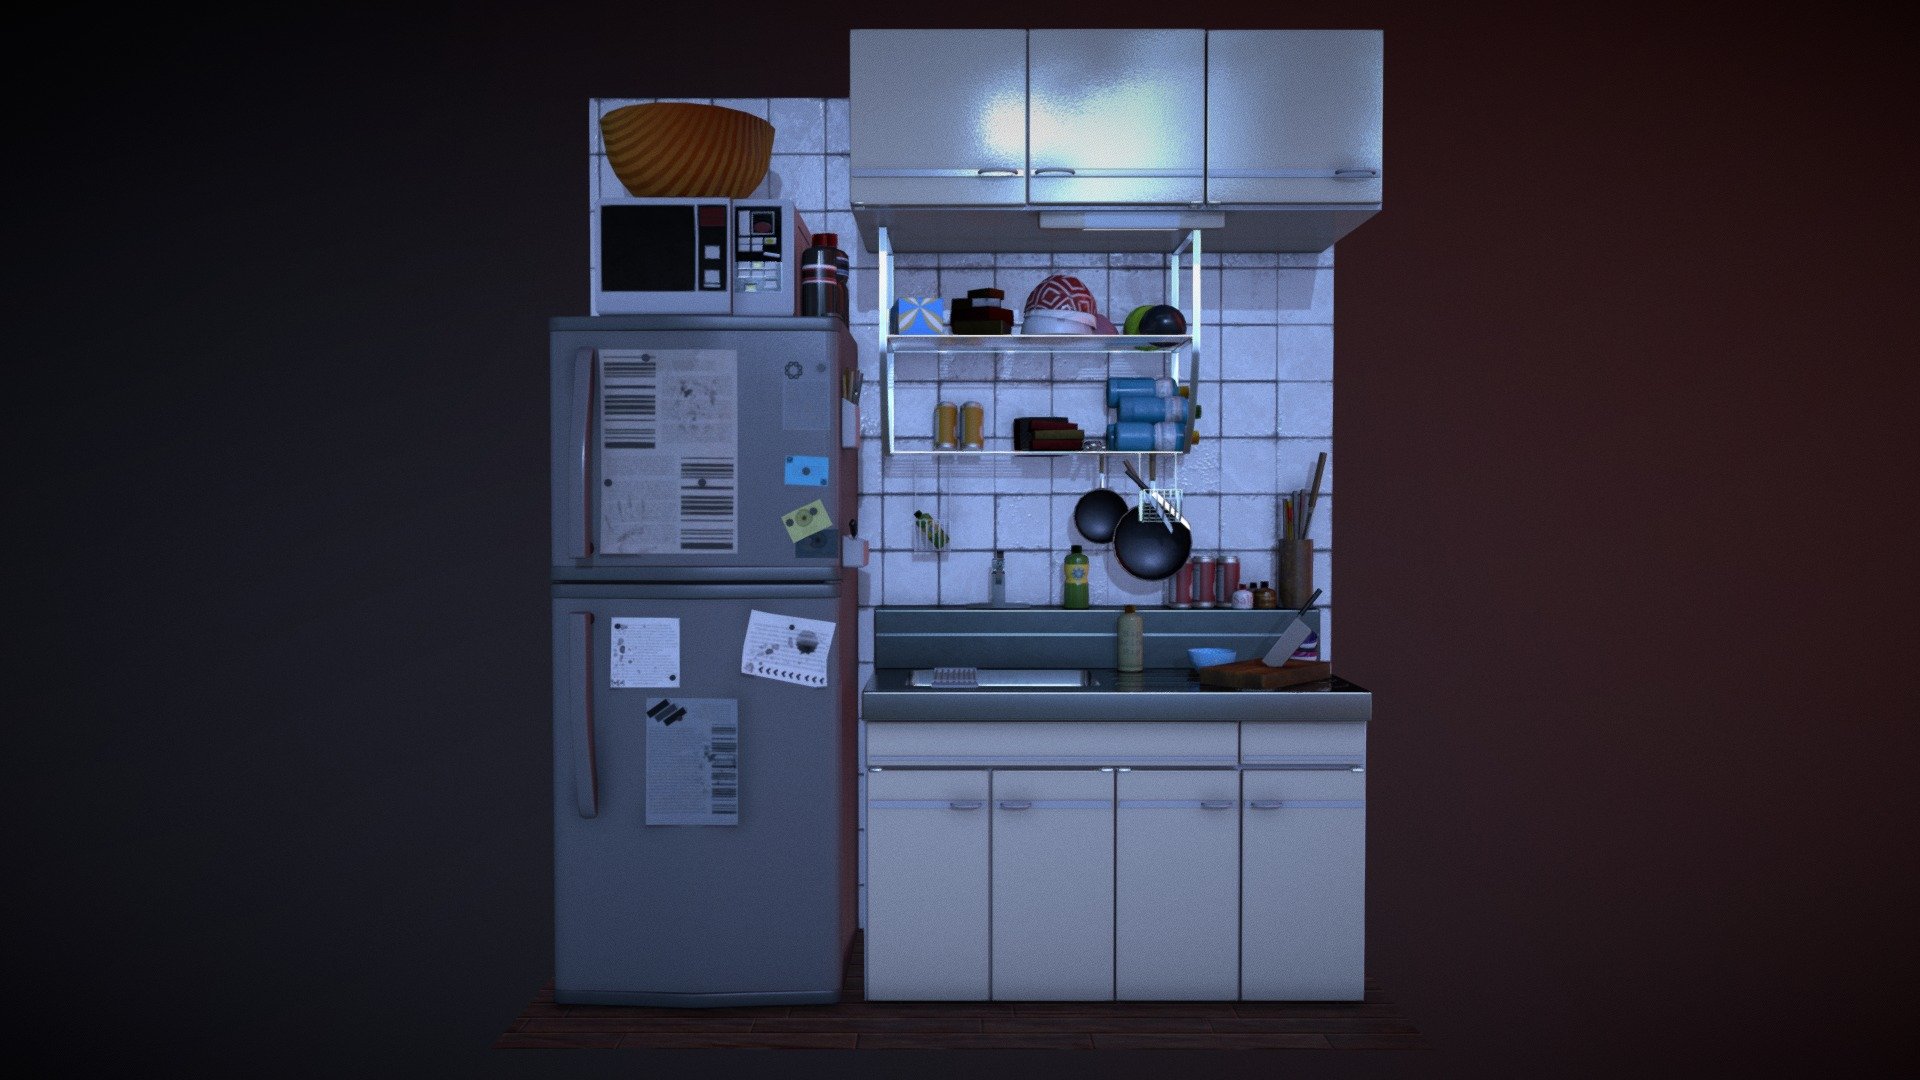 A simple kitchen counter environment 3d model